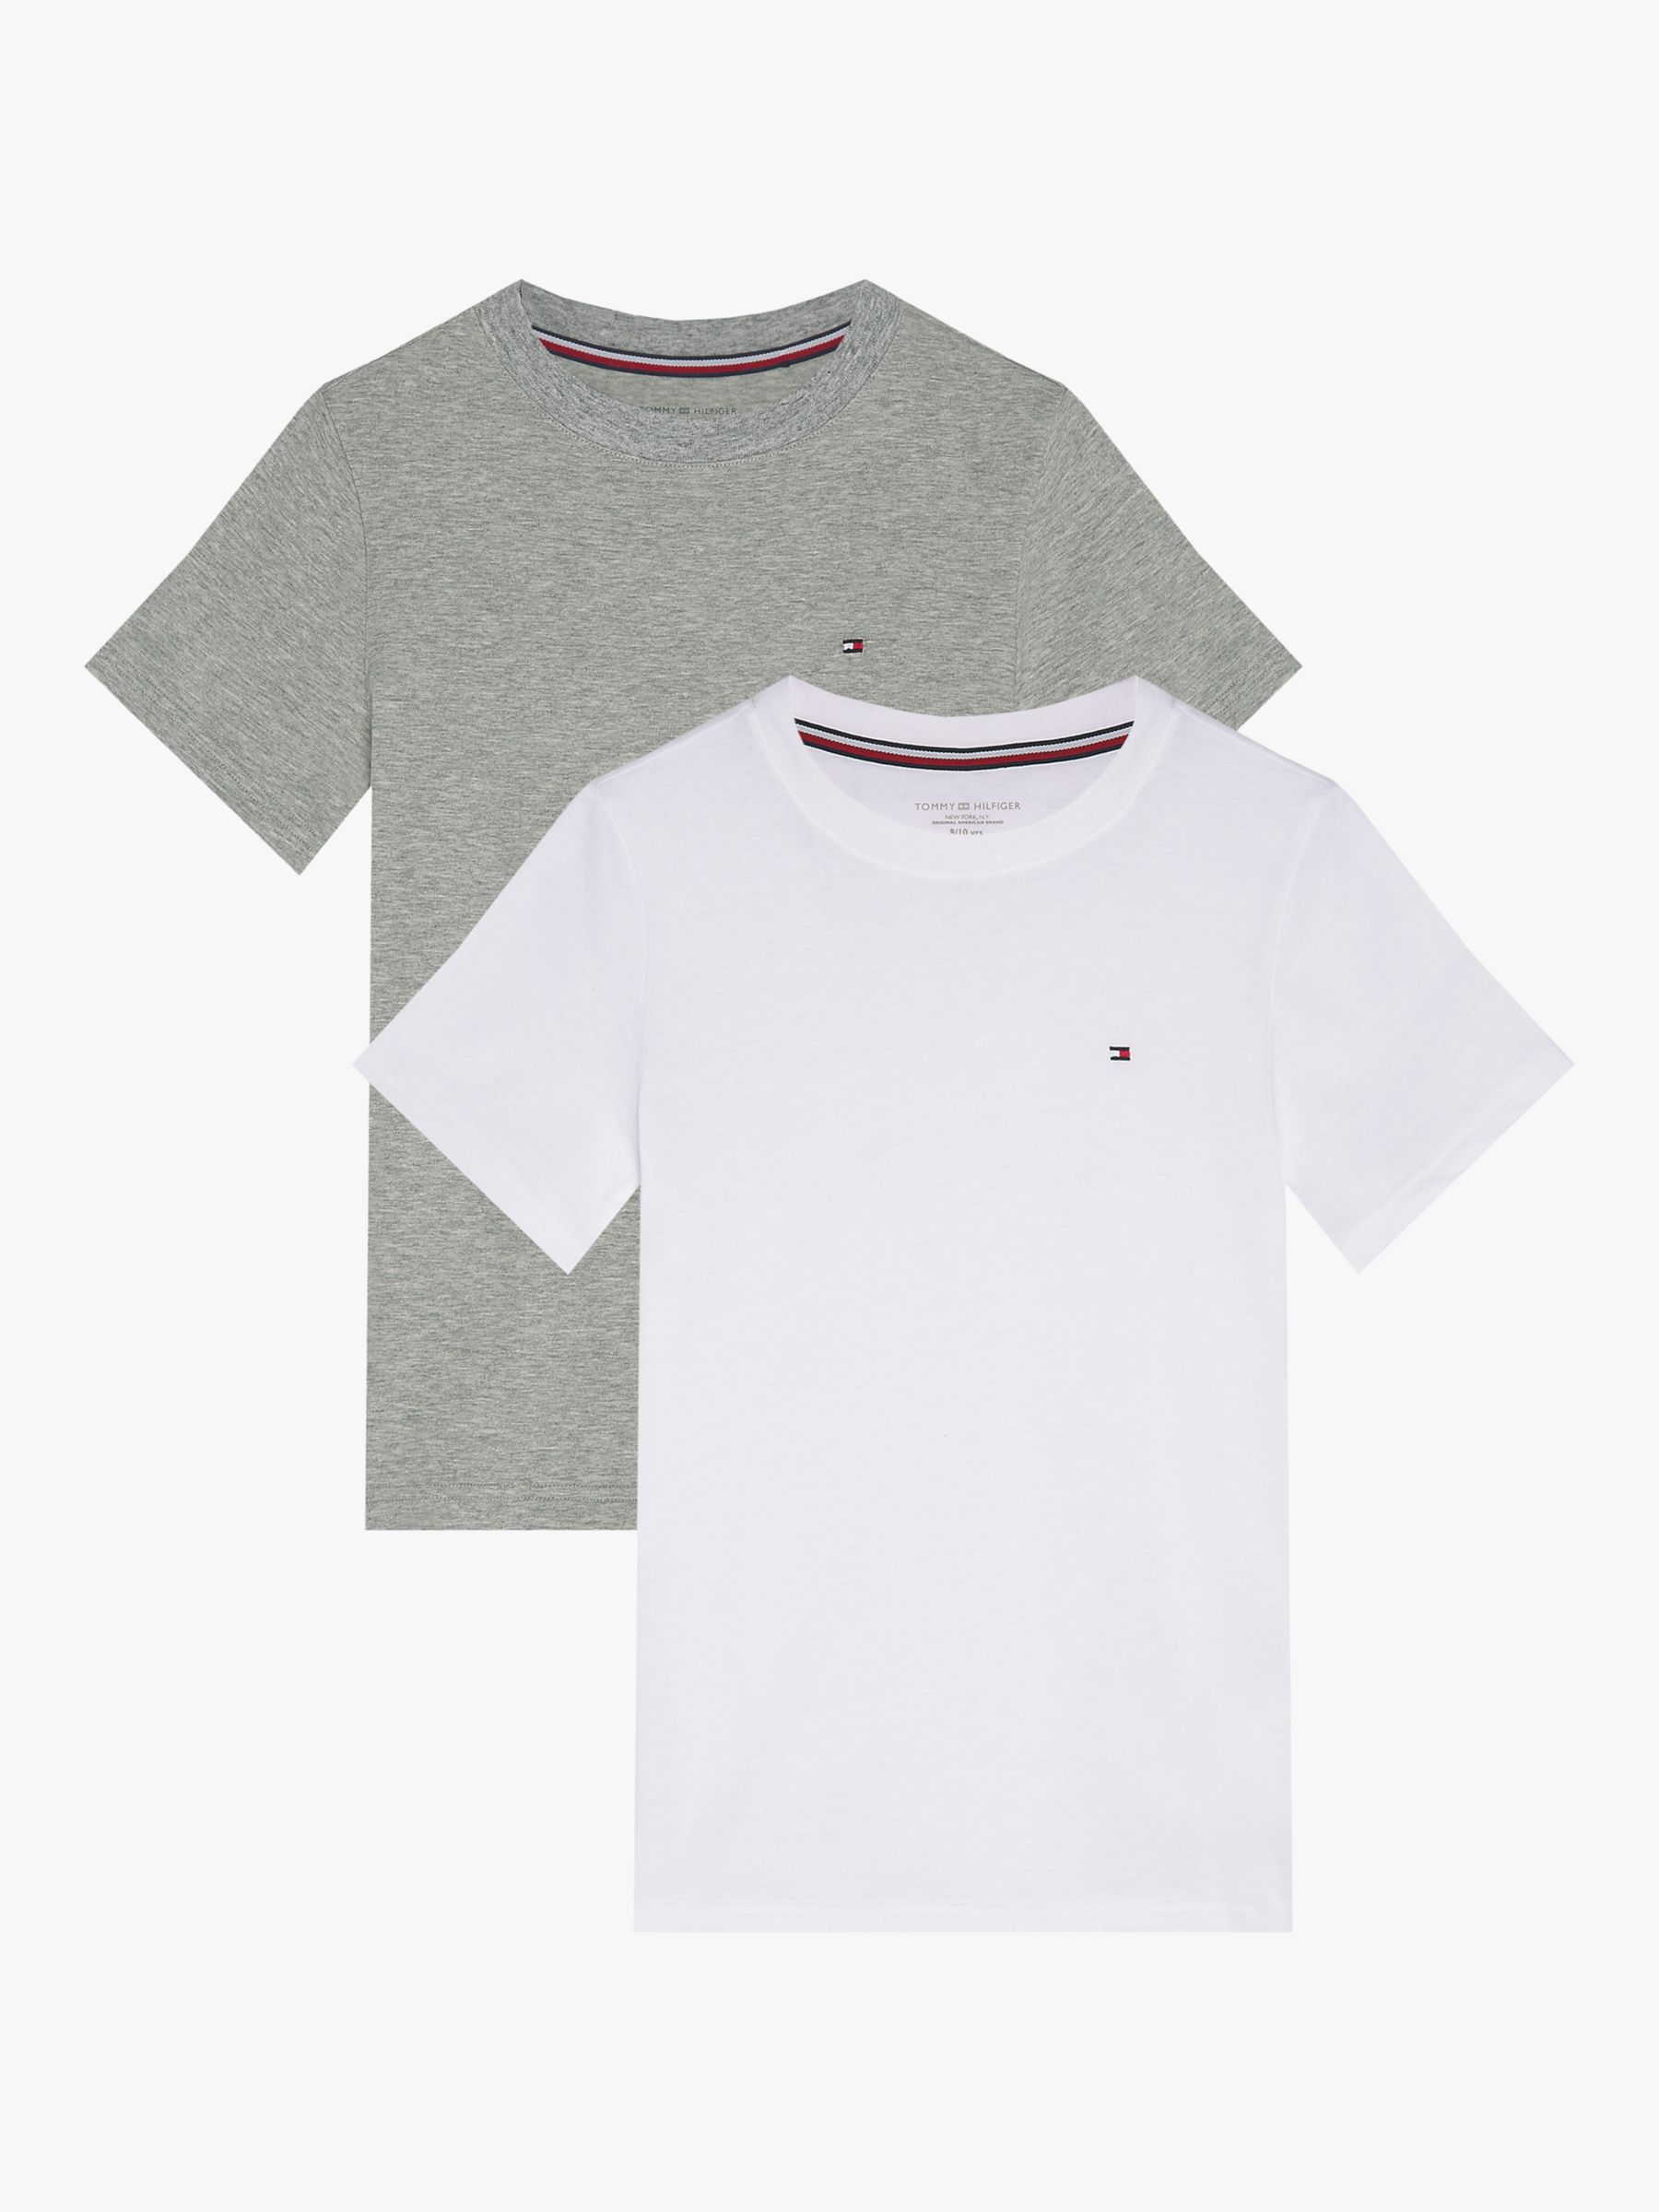 Tommy Hilfiger Authentic T-Shirt - Heather Grey